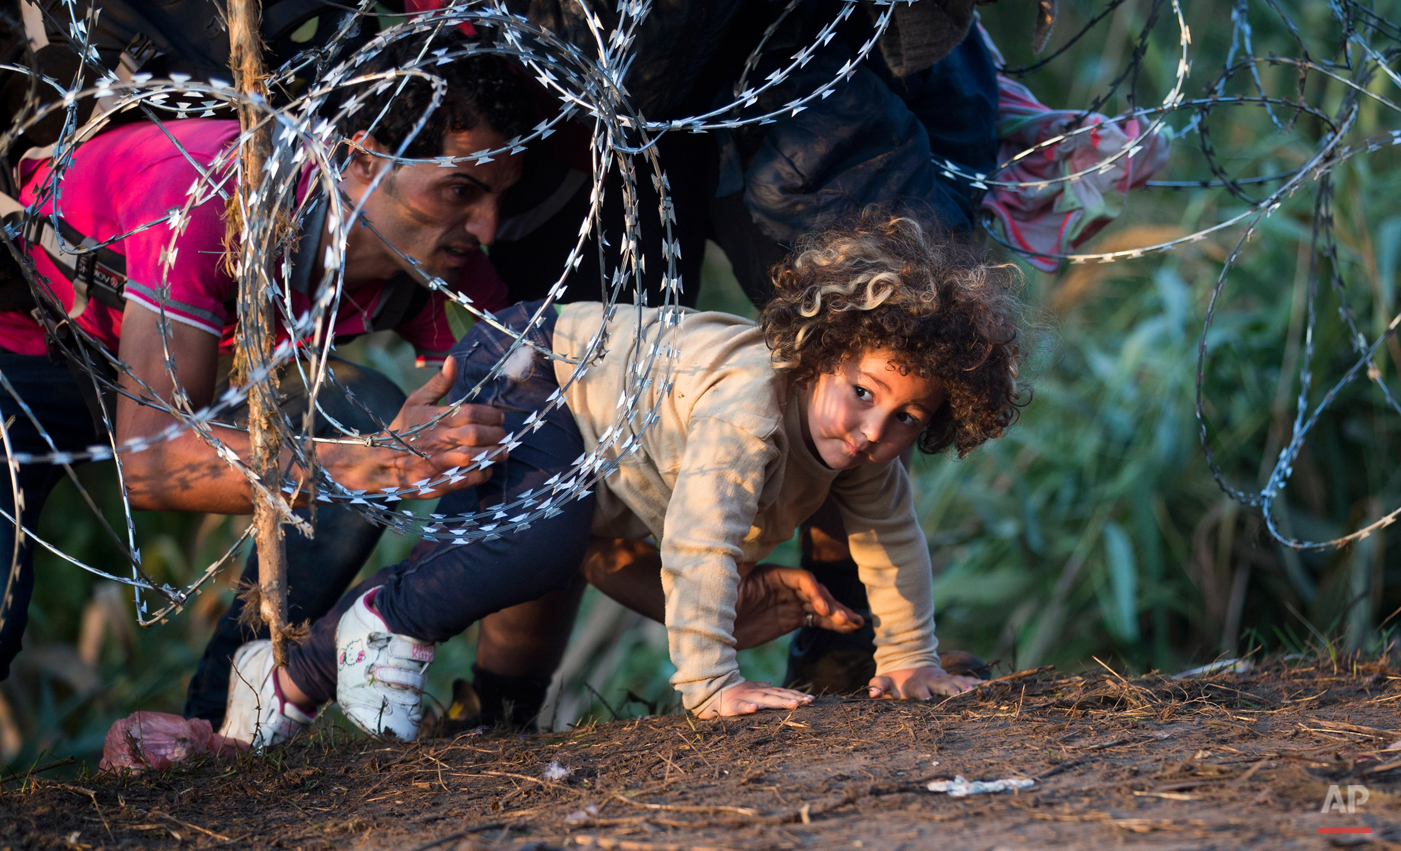  In this Thursday, Aug. 27, 2015 photo, a child is helped cross from Serbia to Hungary through the barbed wire fence near Roszke, southern Hungary. Round the clock, thousands of refugees cross daily along the approximately 110-mile (175-kilometer) bo